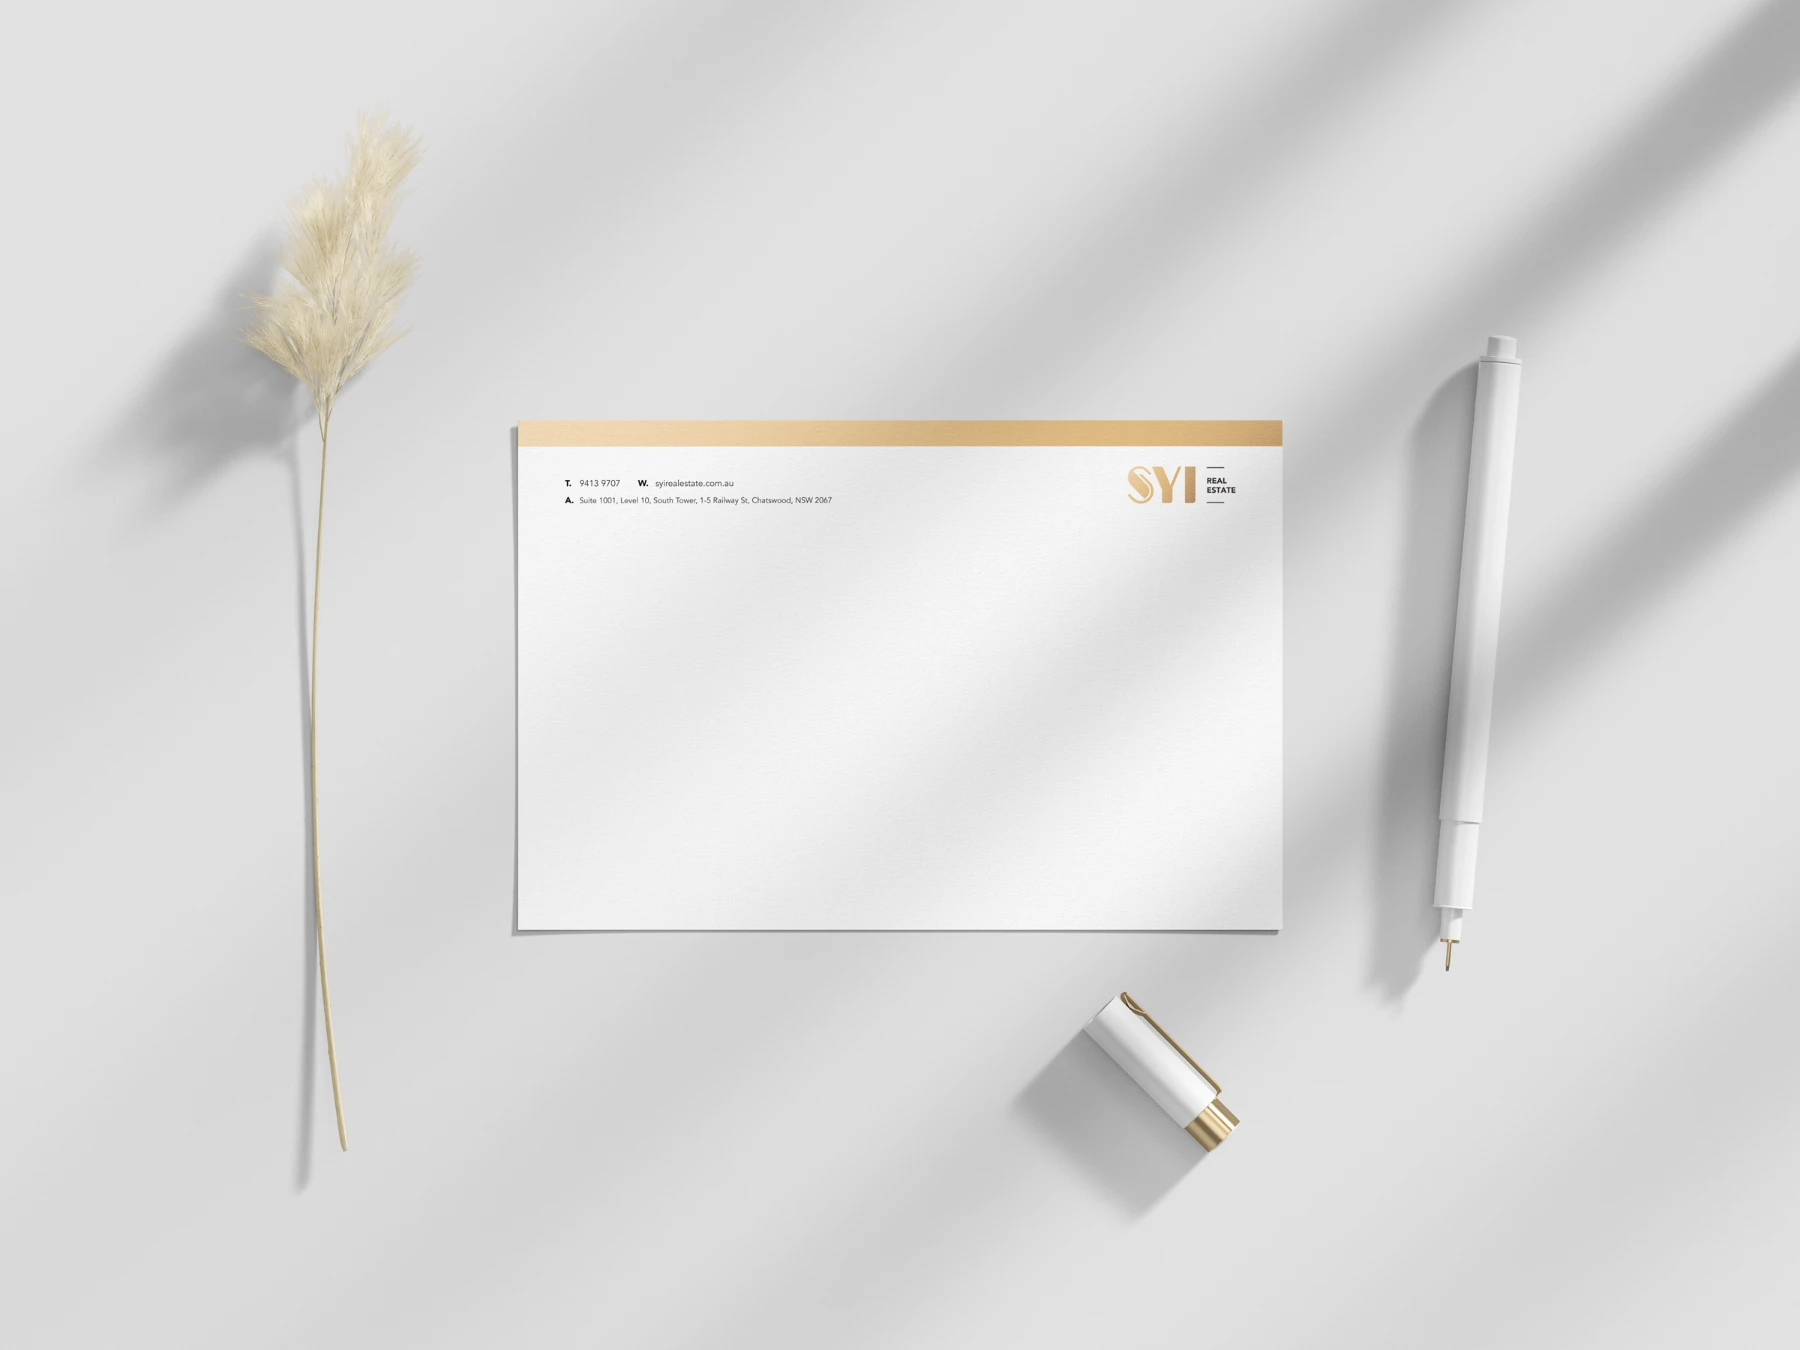 SYI Real Estate Mockup: Work by Skyfield Co